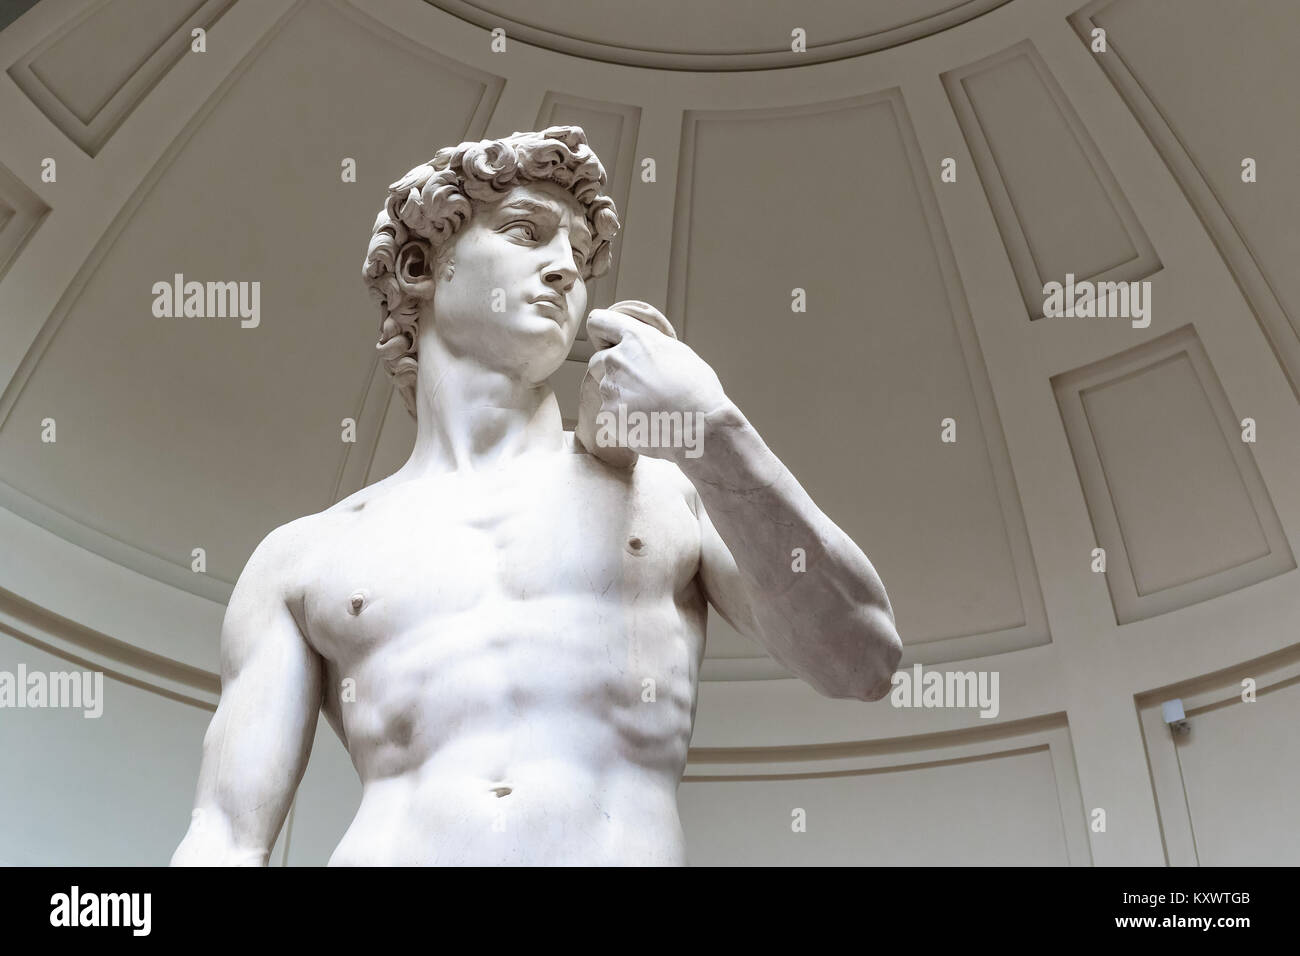 Italy, Florence - November 28, 2017 - Statue of David by Michelangelo in Florence, Italy Stock Photo